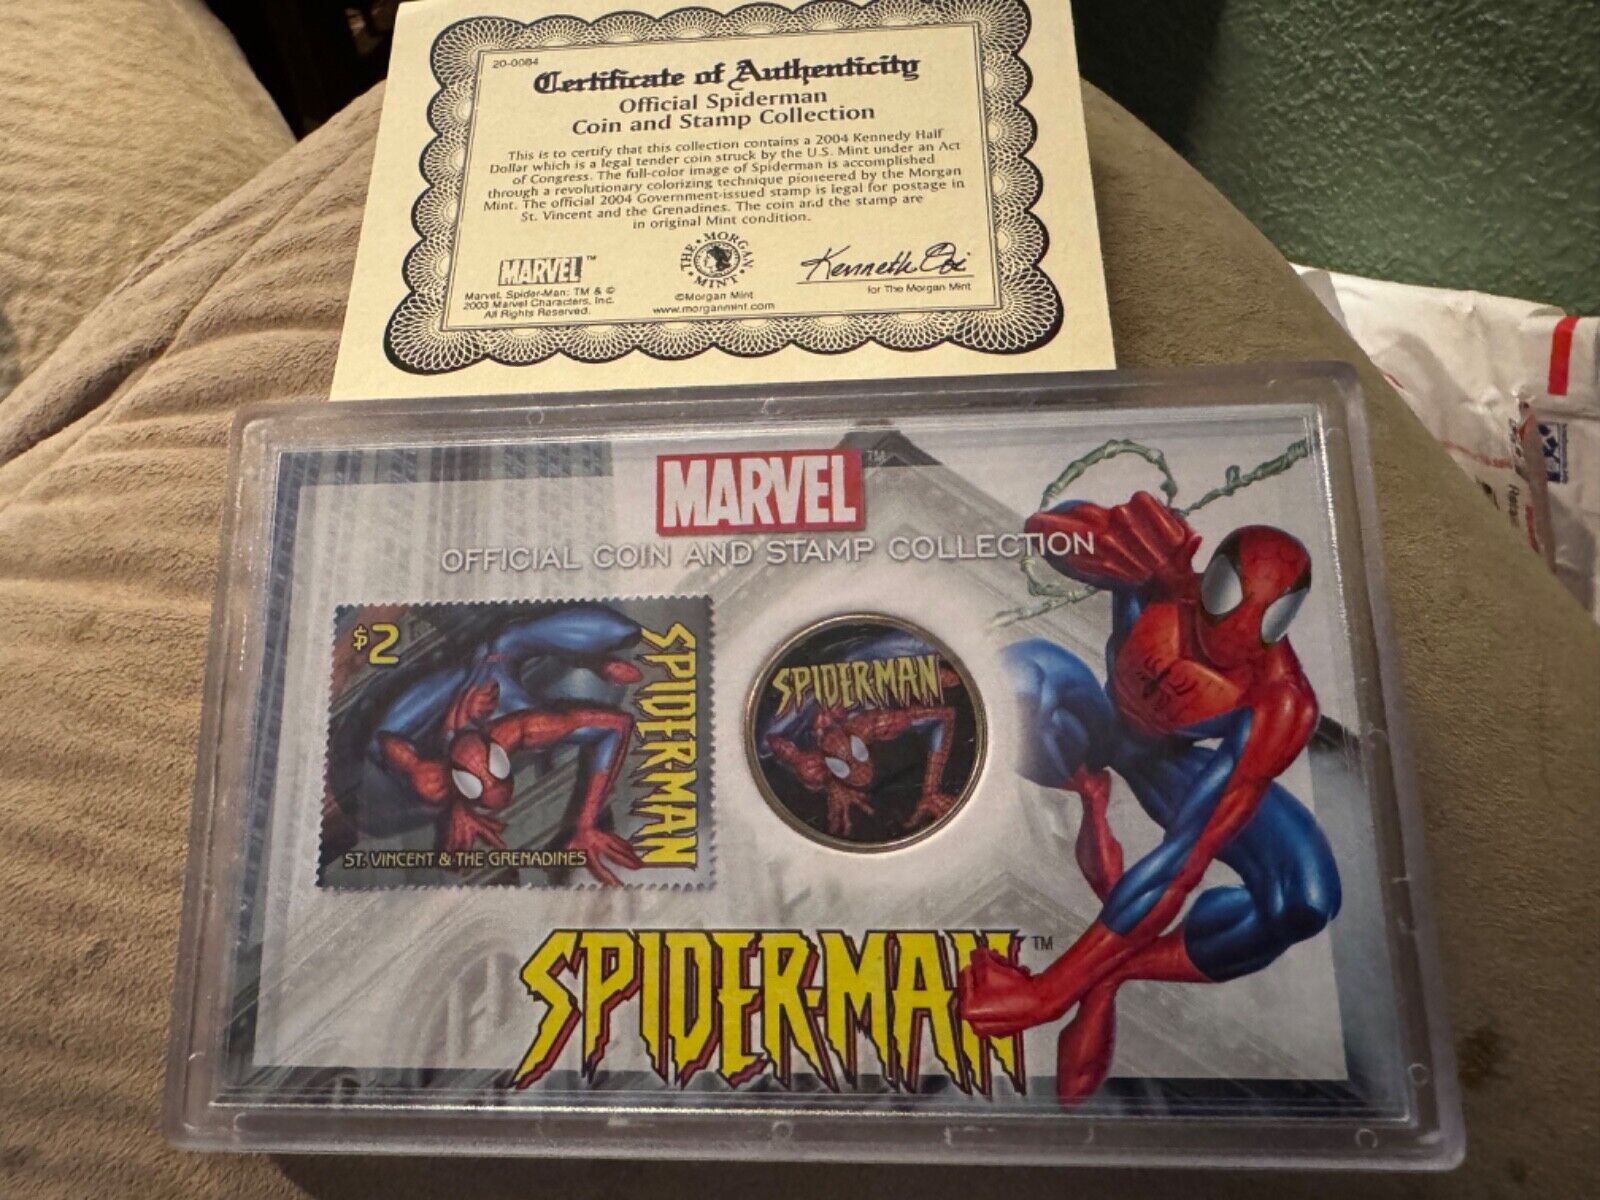 Marvel Comic Spiderman 2004 Official Silver Clad Coin And Stamp Collection Set